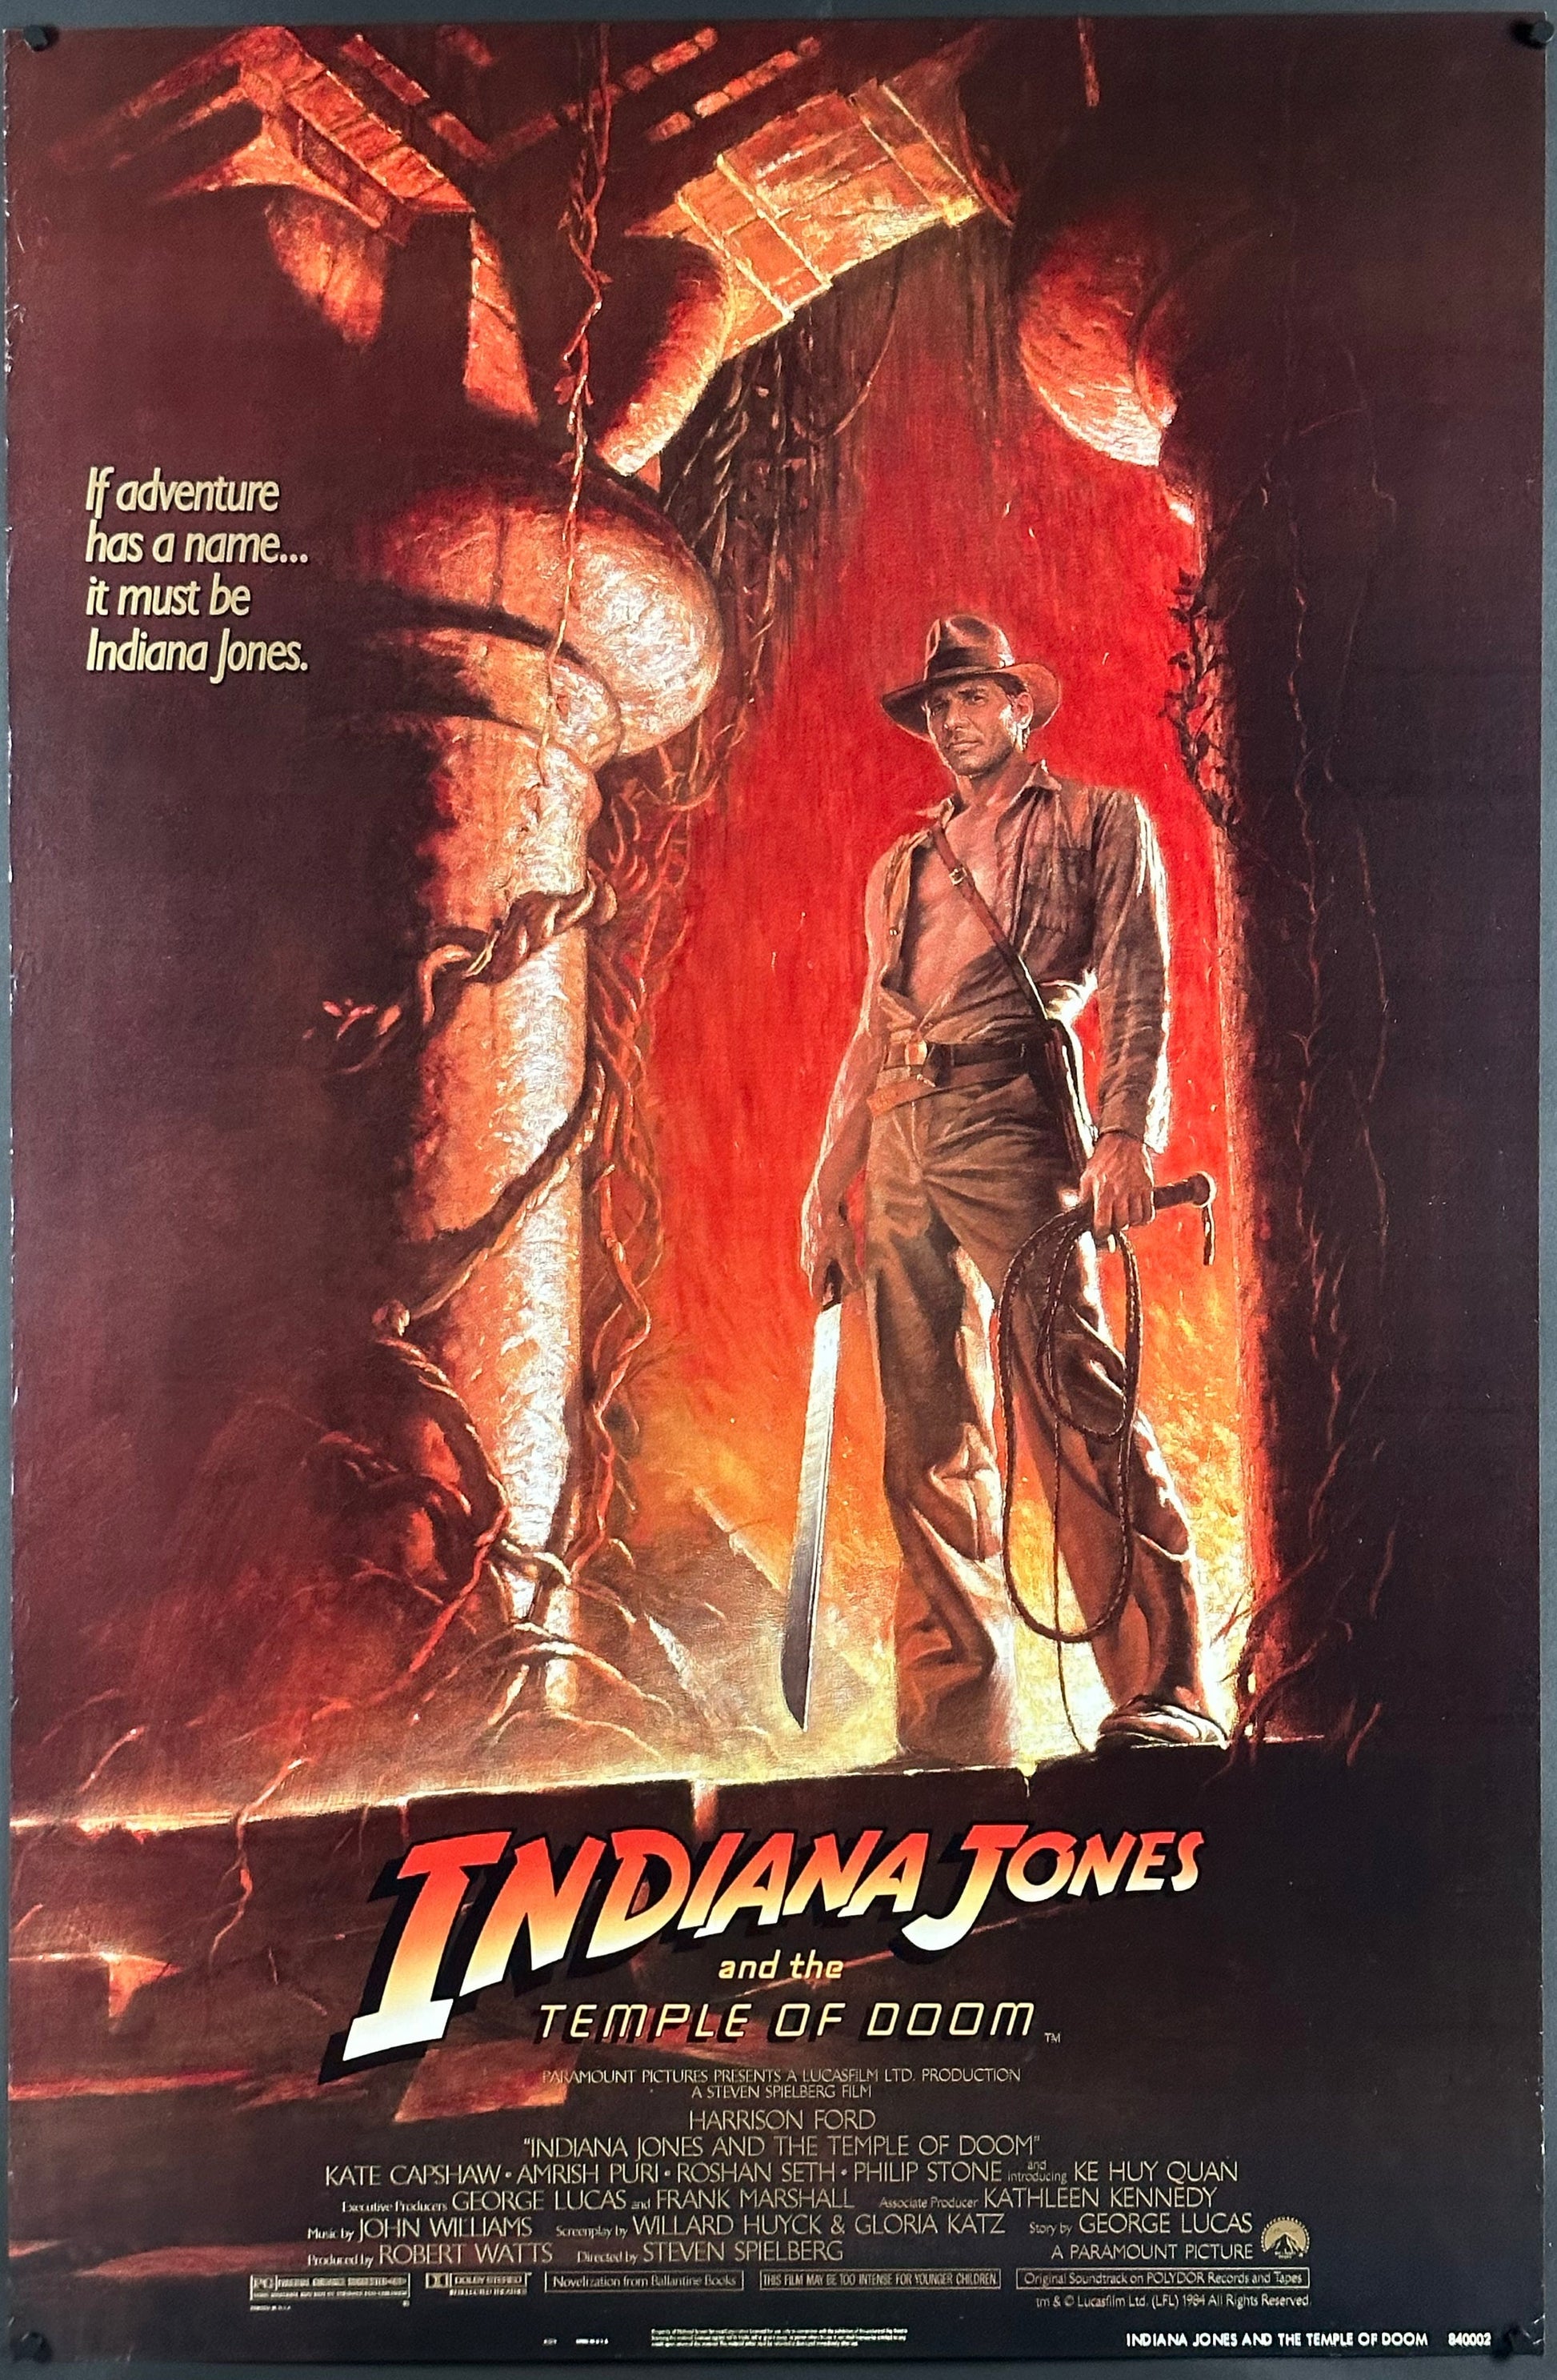 Indiana Jones And The Temple Of Doom US One Sheet (1984) - ORIGINAL RELEASE - posterpalace.com